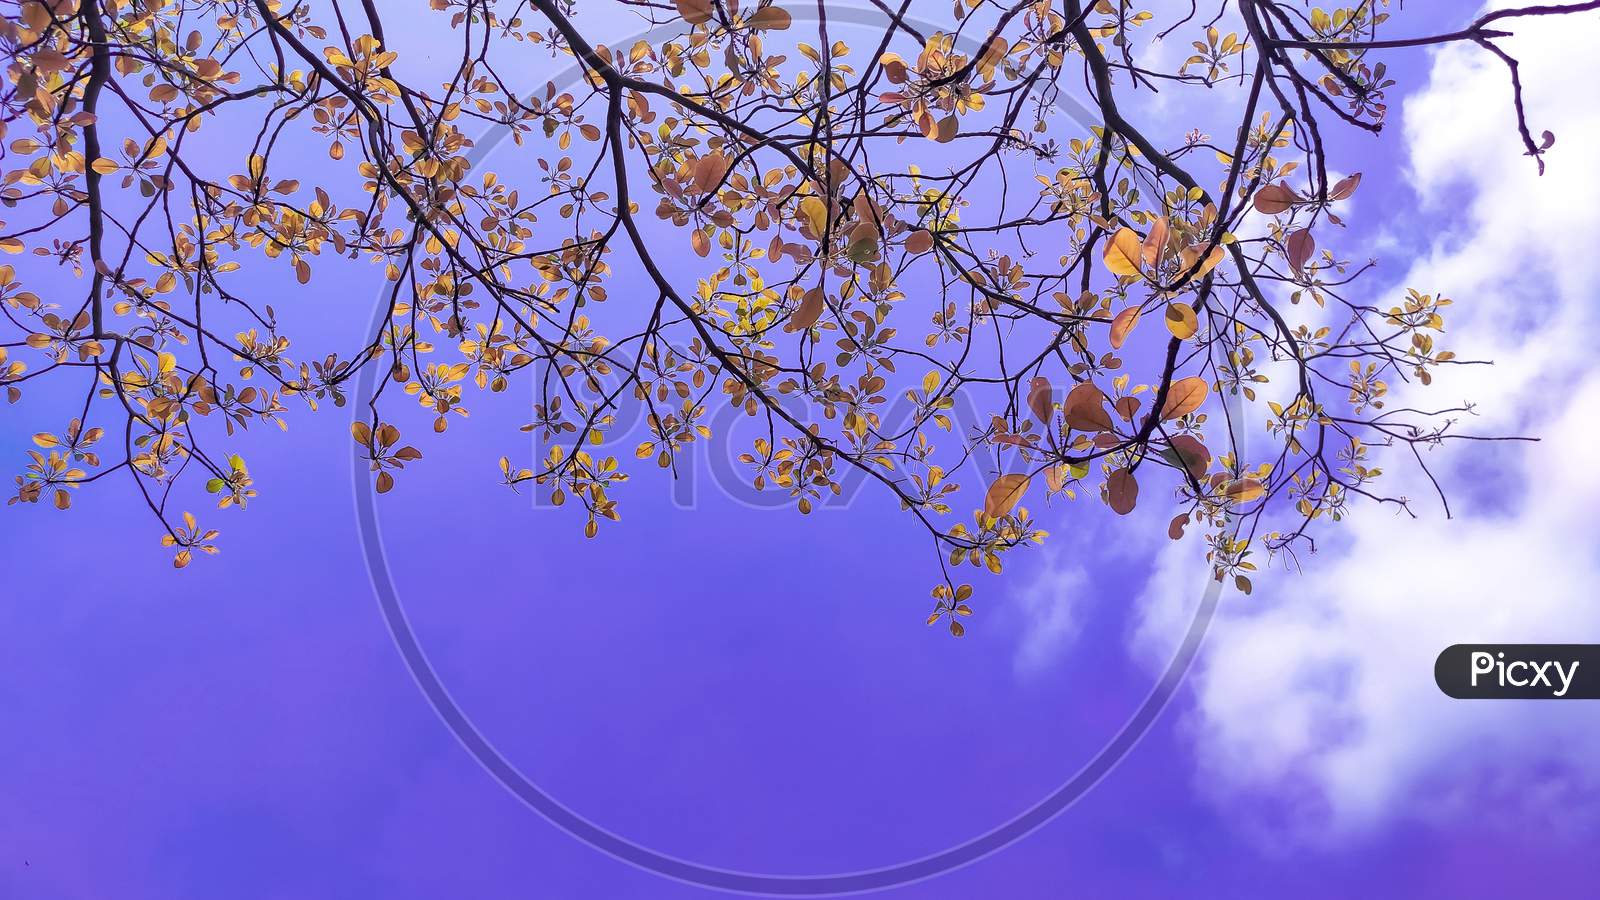 Colourful leaves with the branches of a tree in the blue sky background.